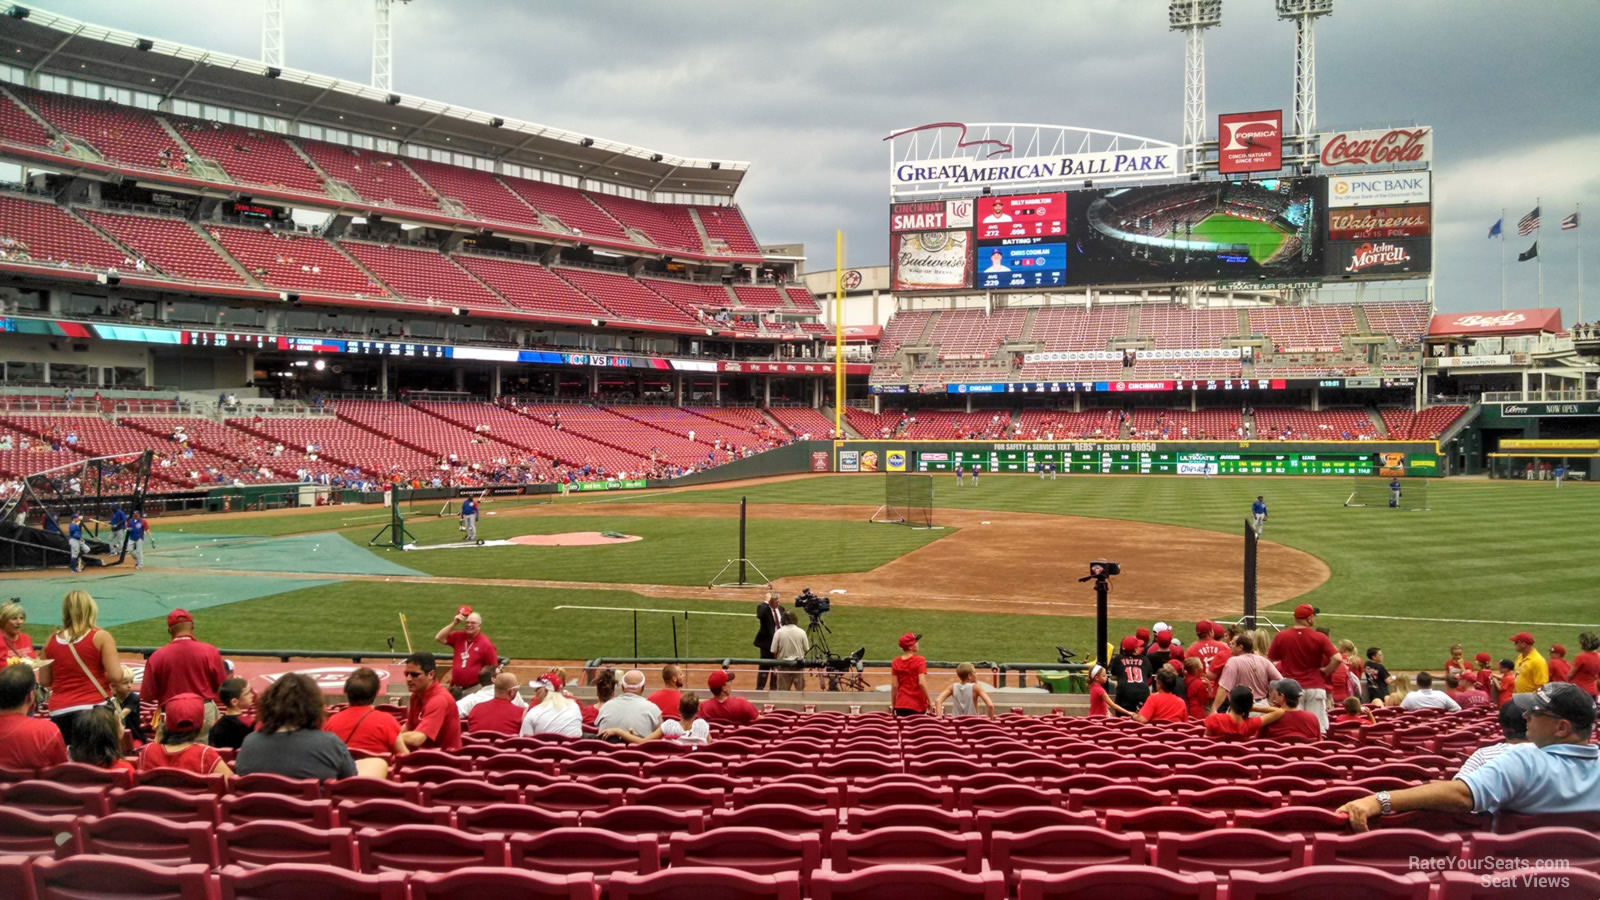 Reds Great American Ballpark Seating Chart